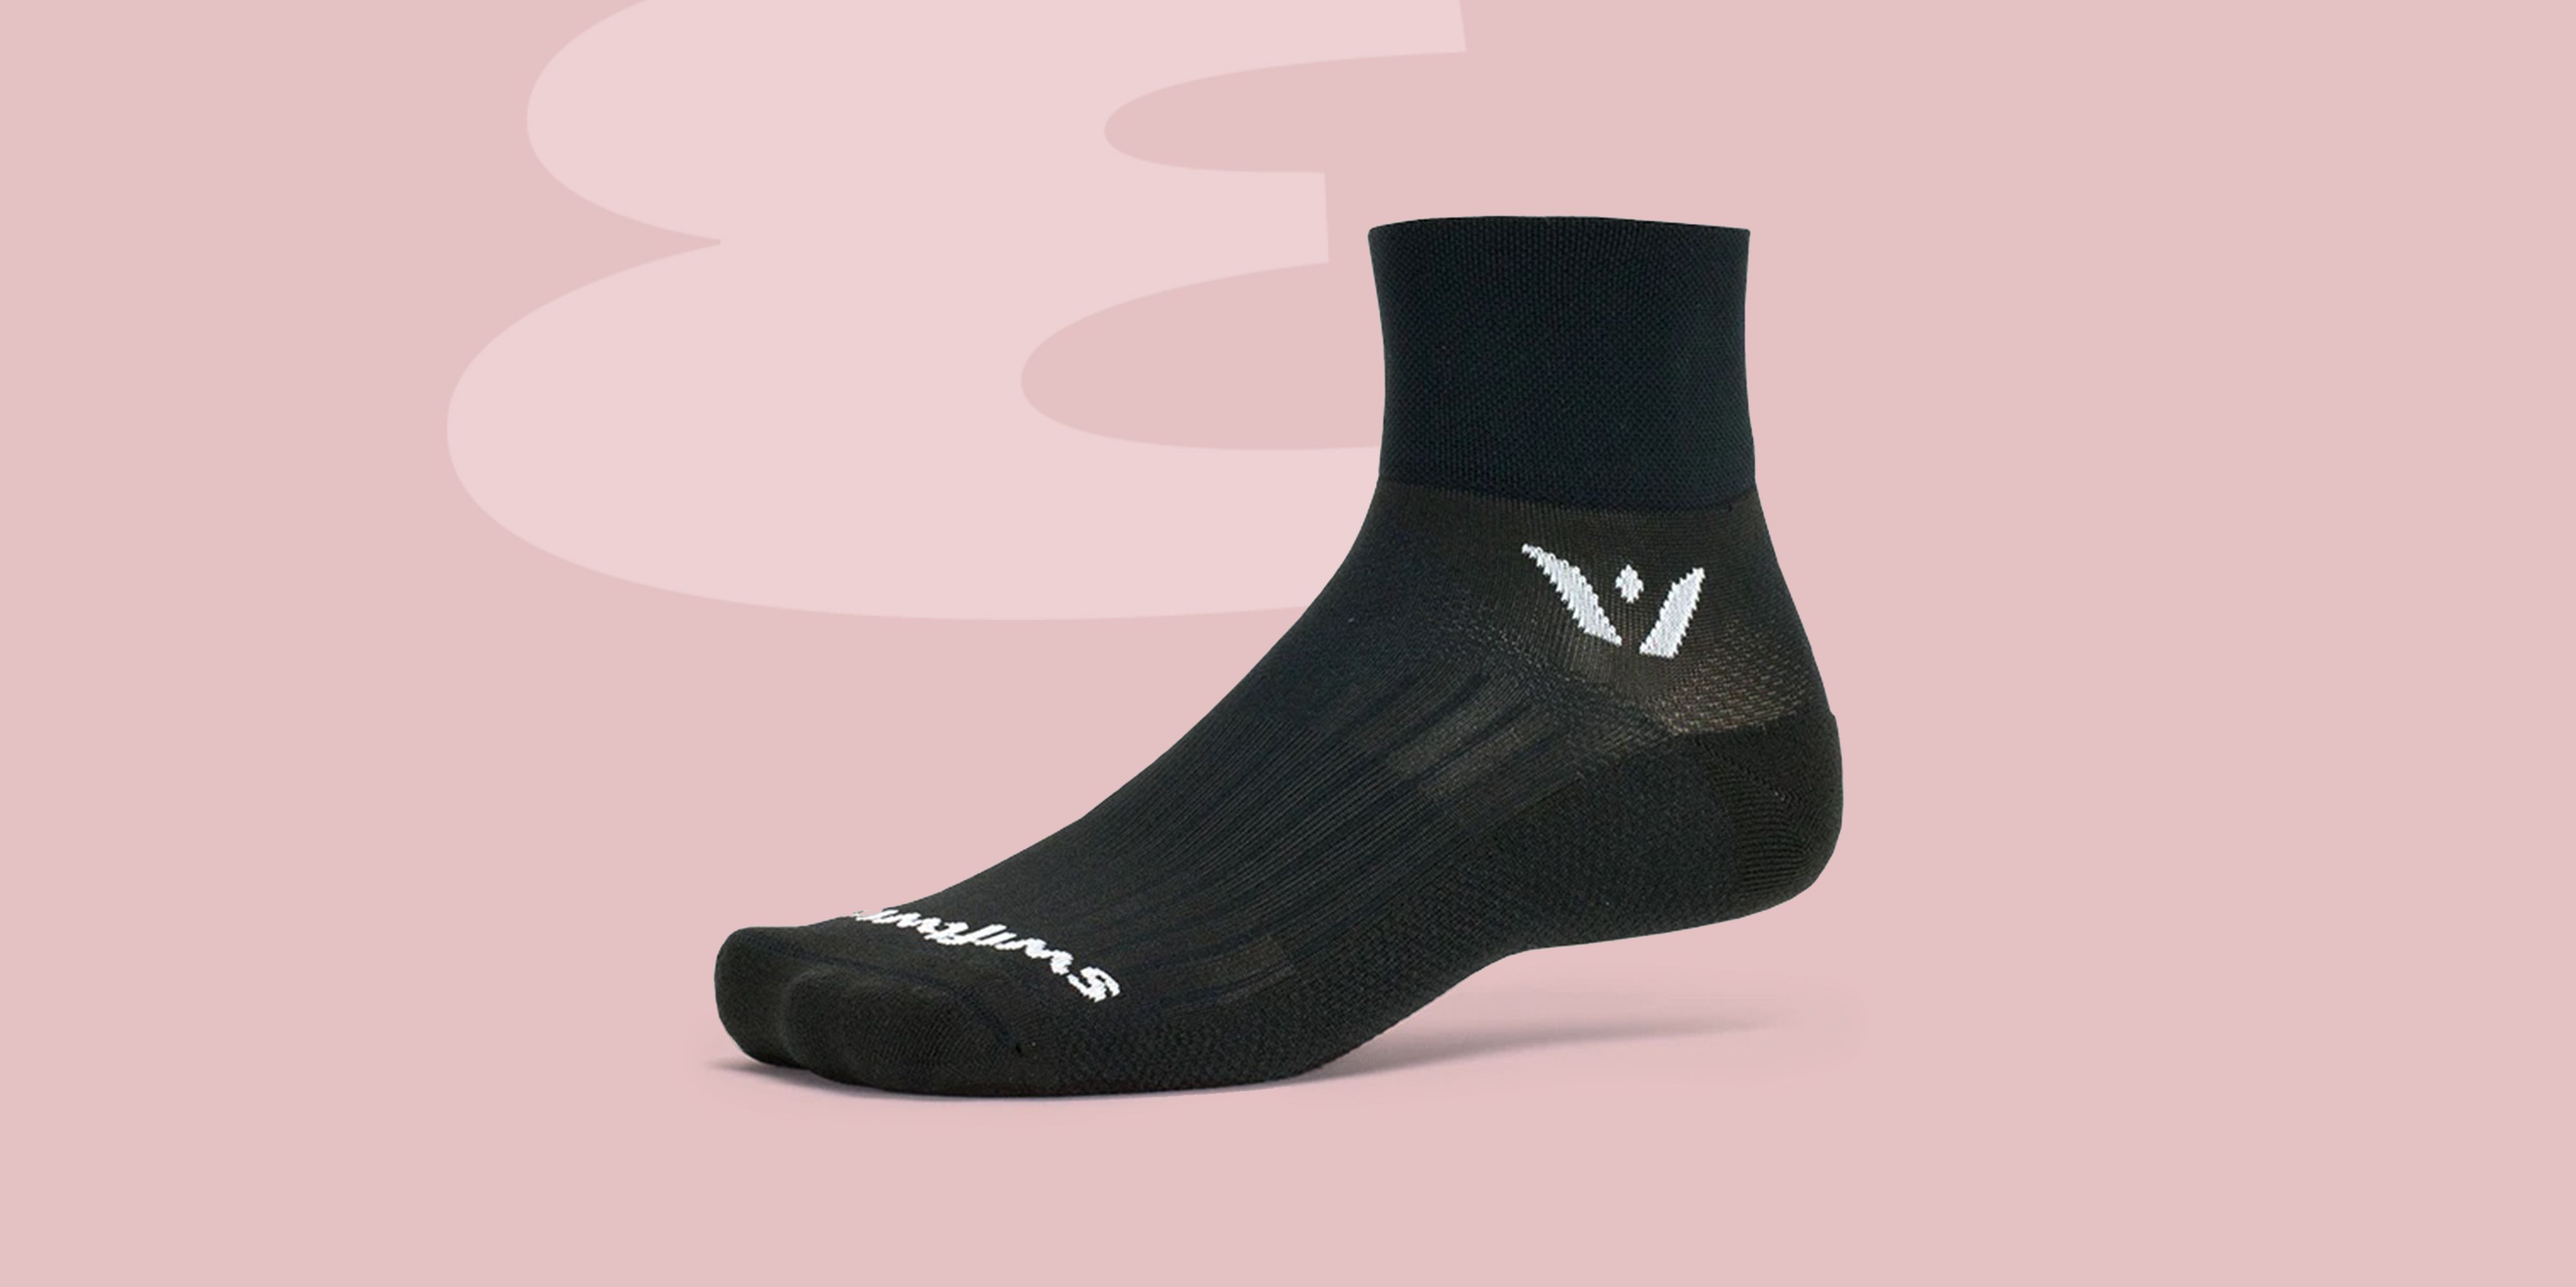 The Best Compression Socks and Items For Long-Haul Flights